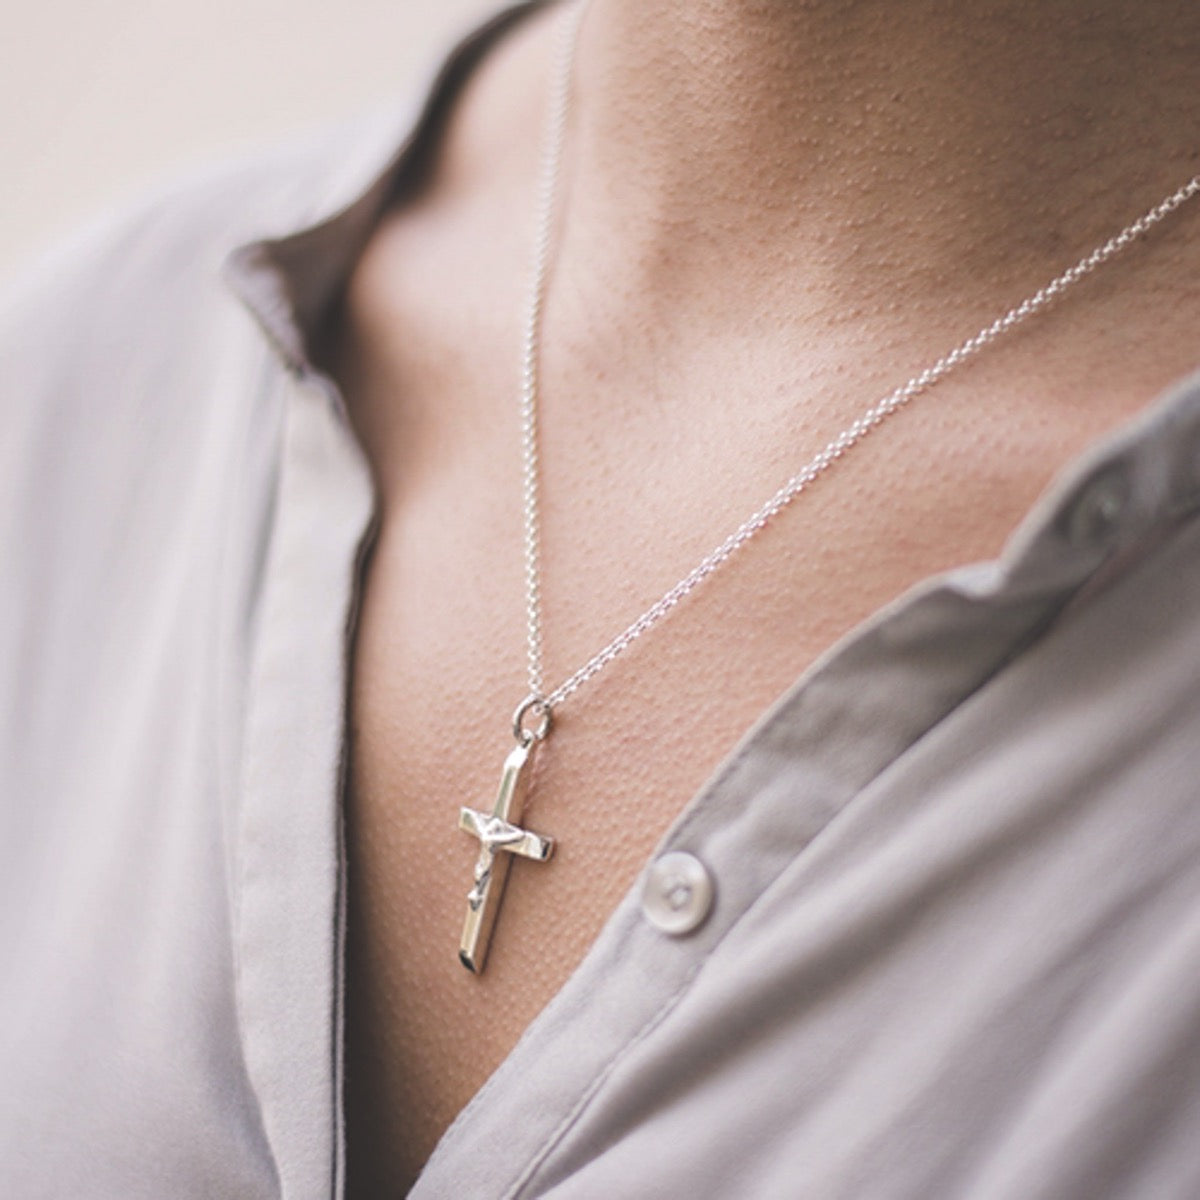 Solid silver crucifix necklace